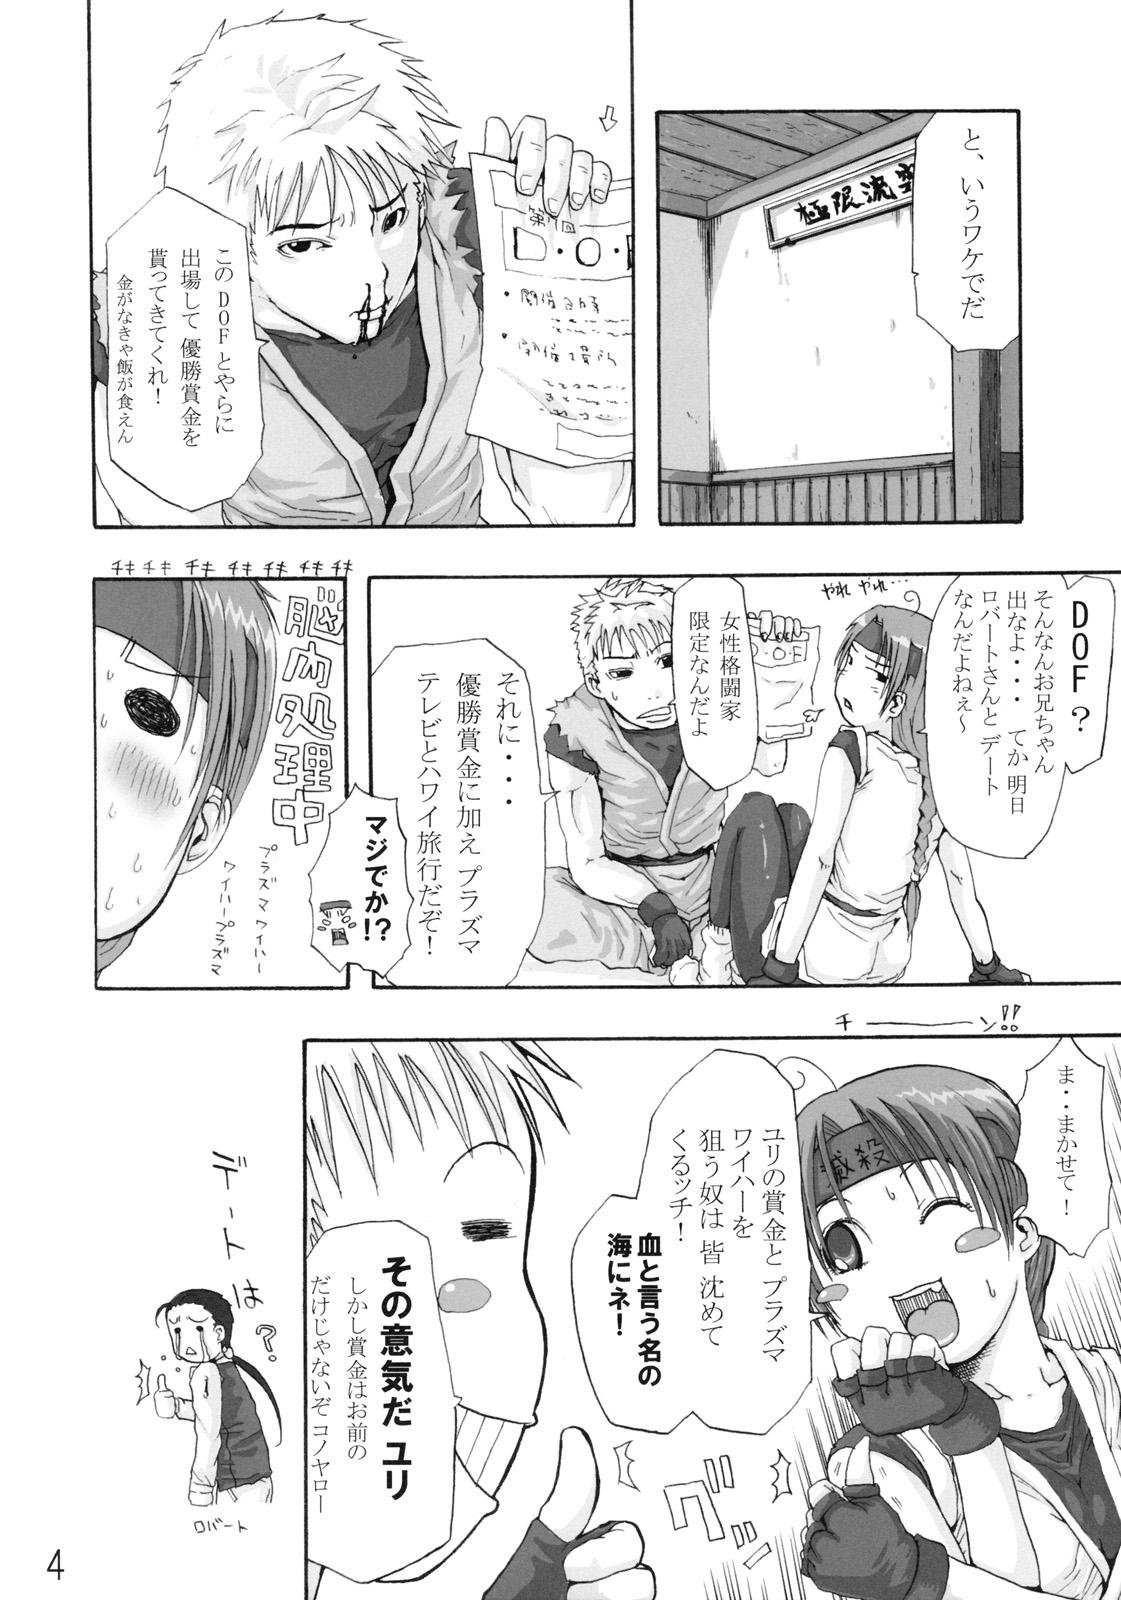 Raw DOF the densya of fighters - King of fighters Fatal fury Creampies - Page 5